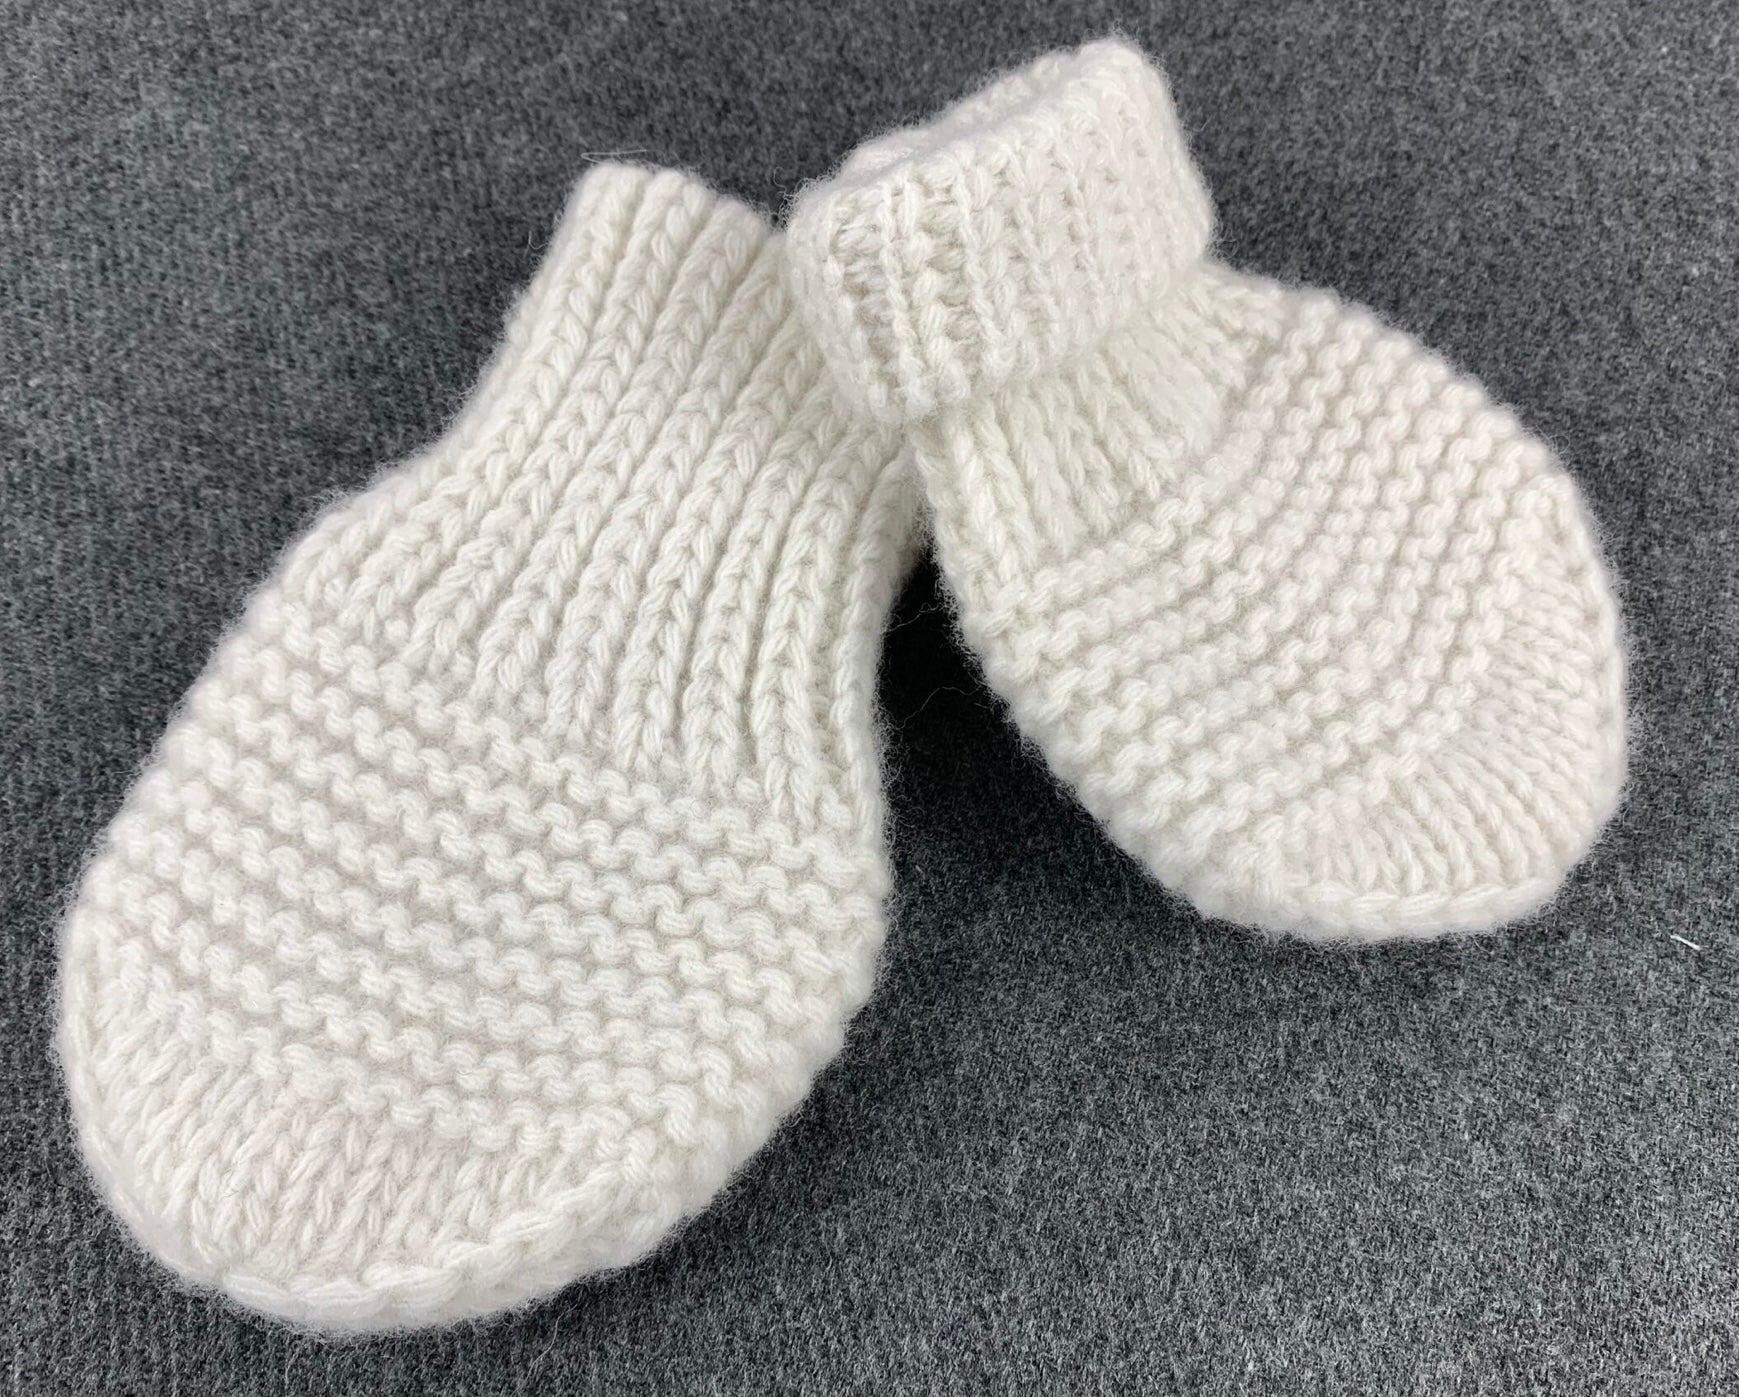 Cashmere/Wool blend booties and mittens